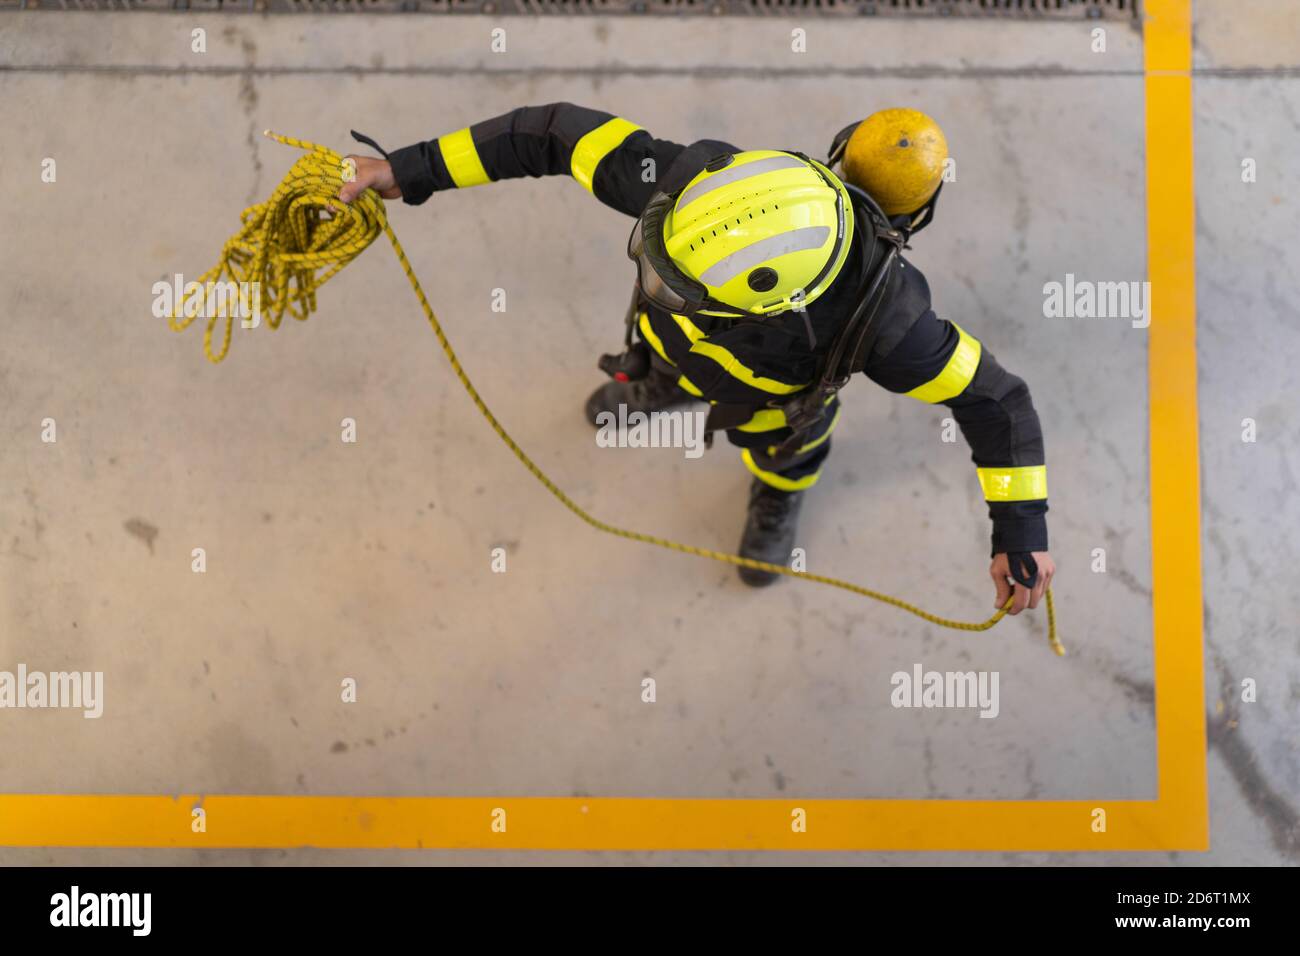 Top view of unrecognizable firefighter in protective hardhat and bright uniform standing on cement floor with rope during routine practices at work Stock Photo